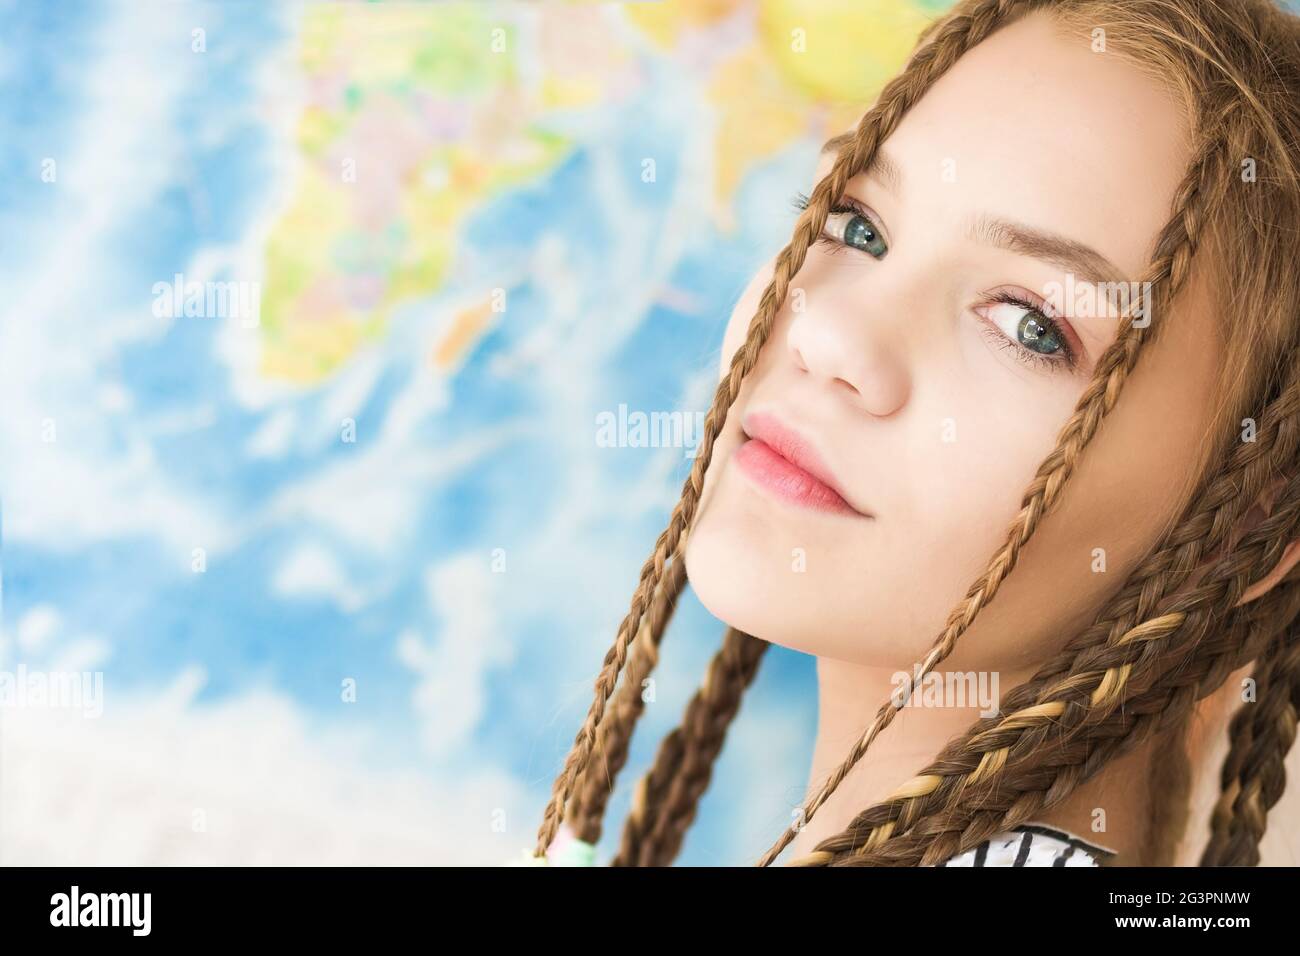 Portrait of a beautiful girl face close-up on a world map background. Soft natural light Stock Photo